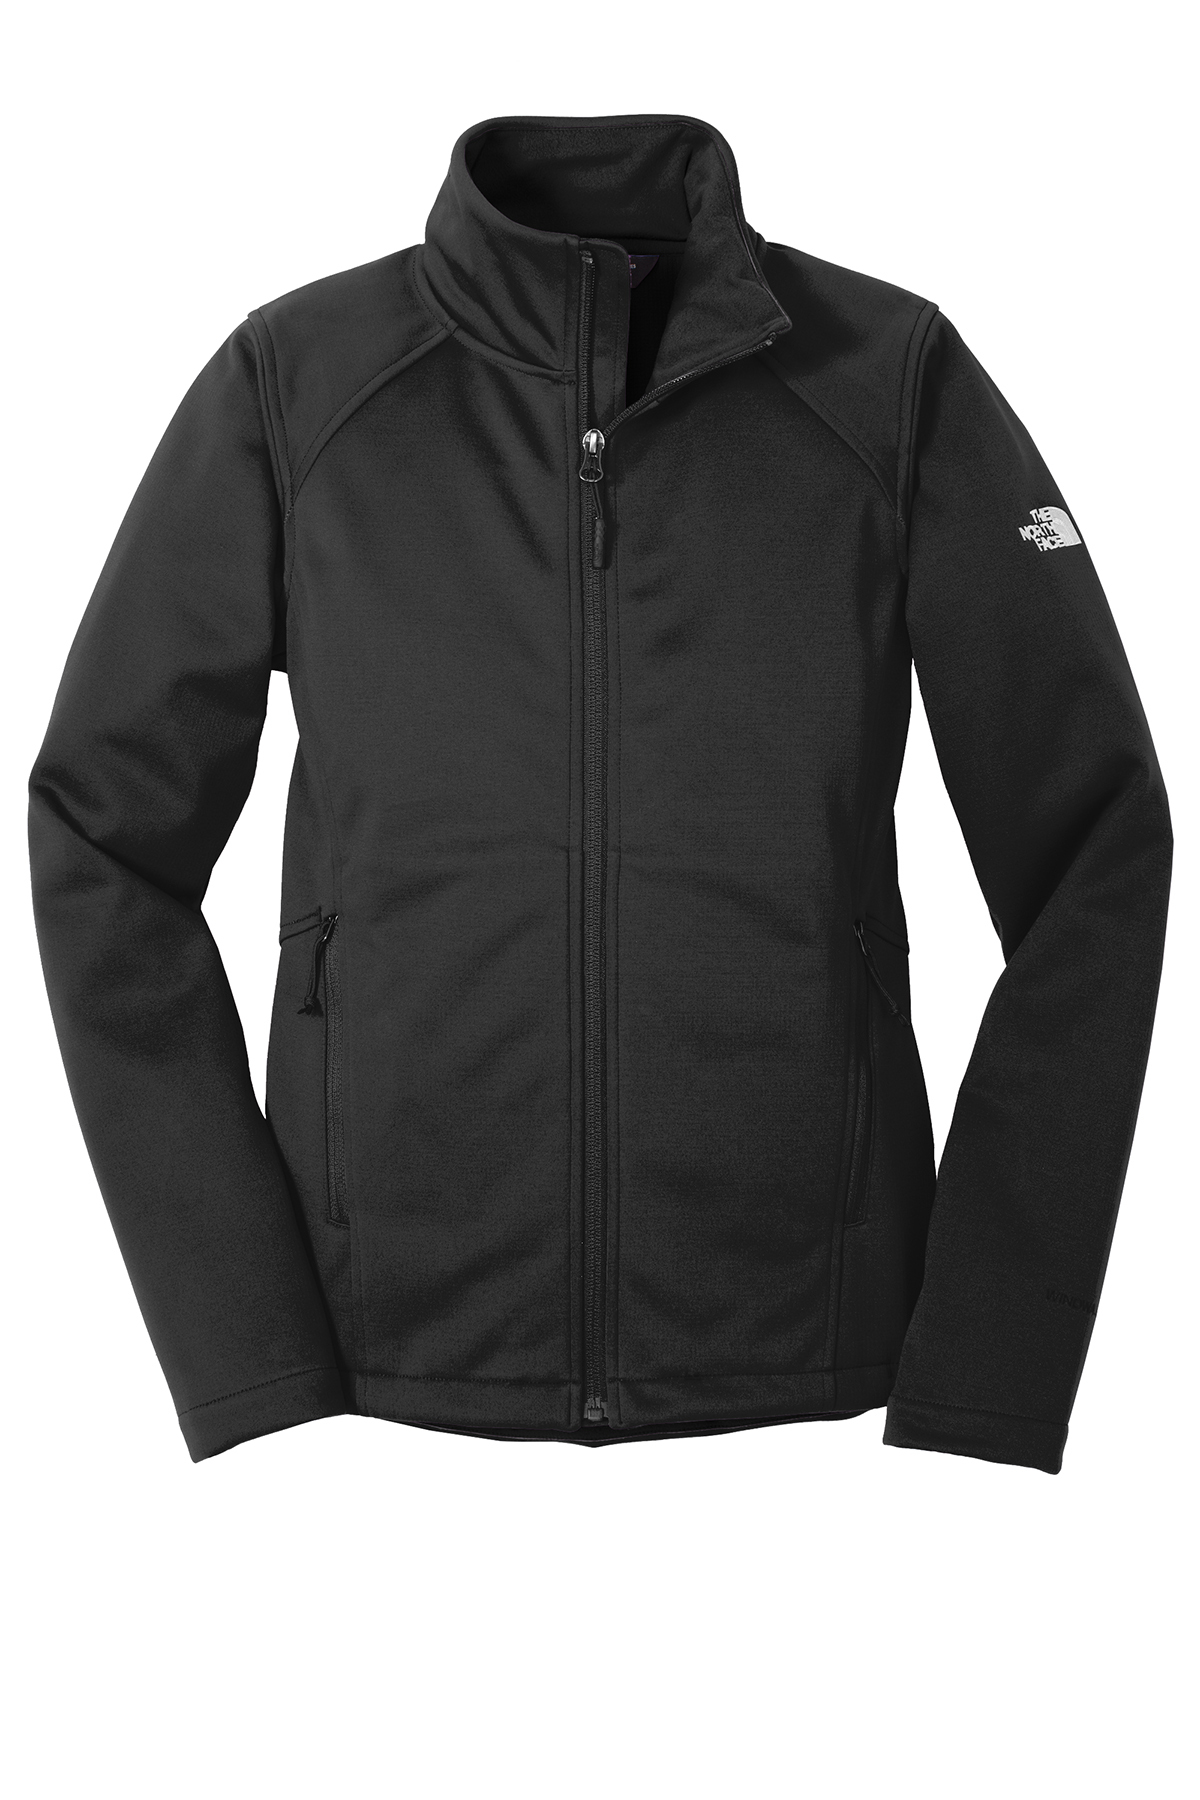 The North Face<SUP>®</SUP> Ladies Ridgewall Soft Shell Vest